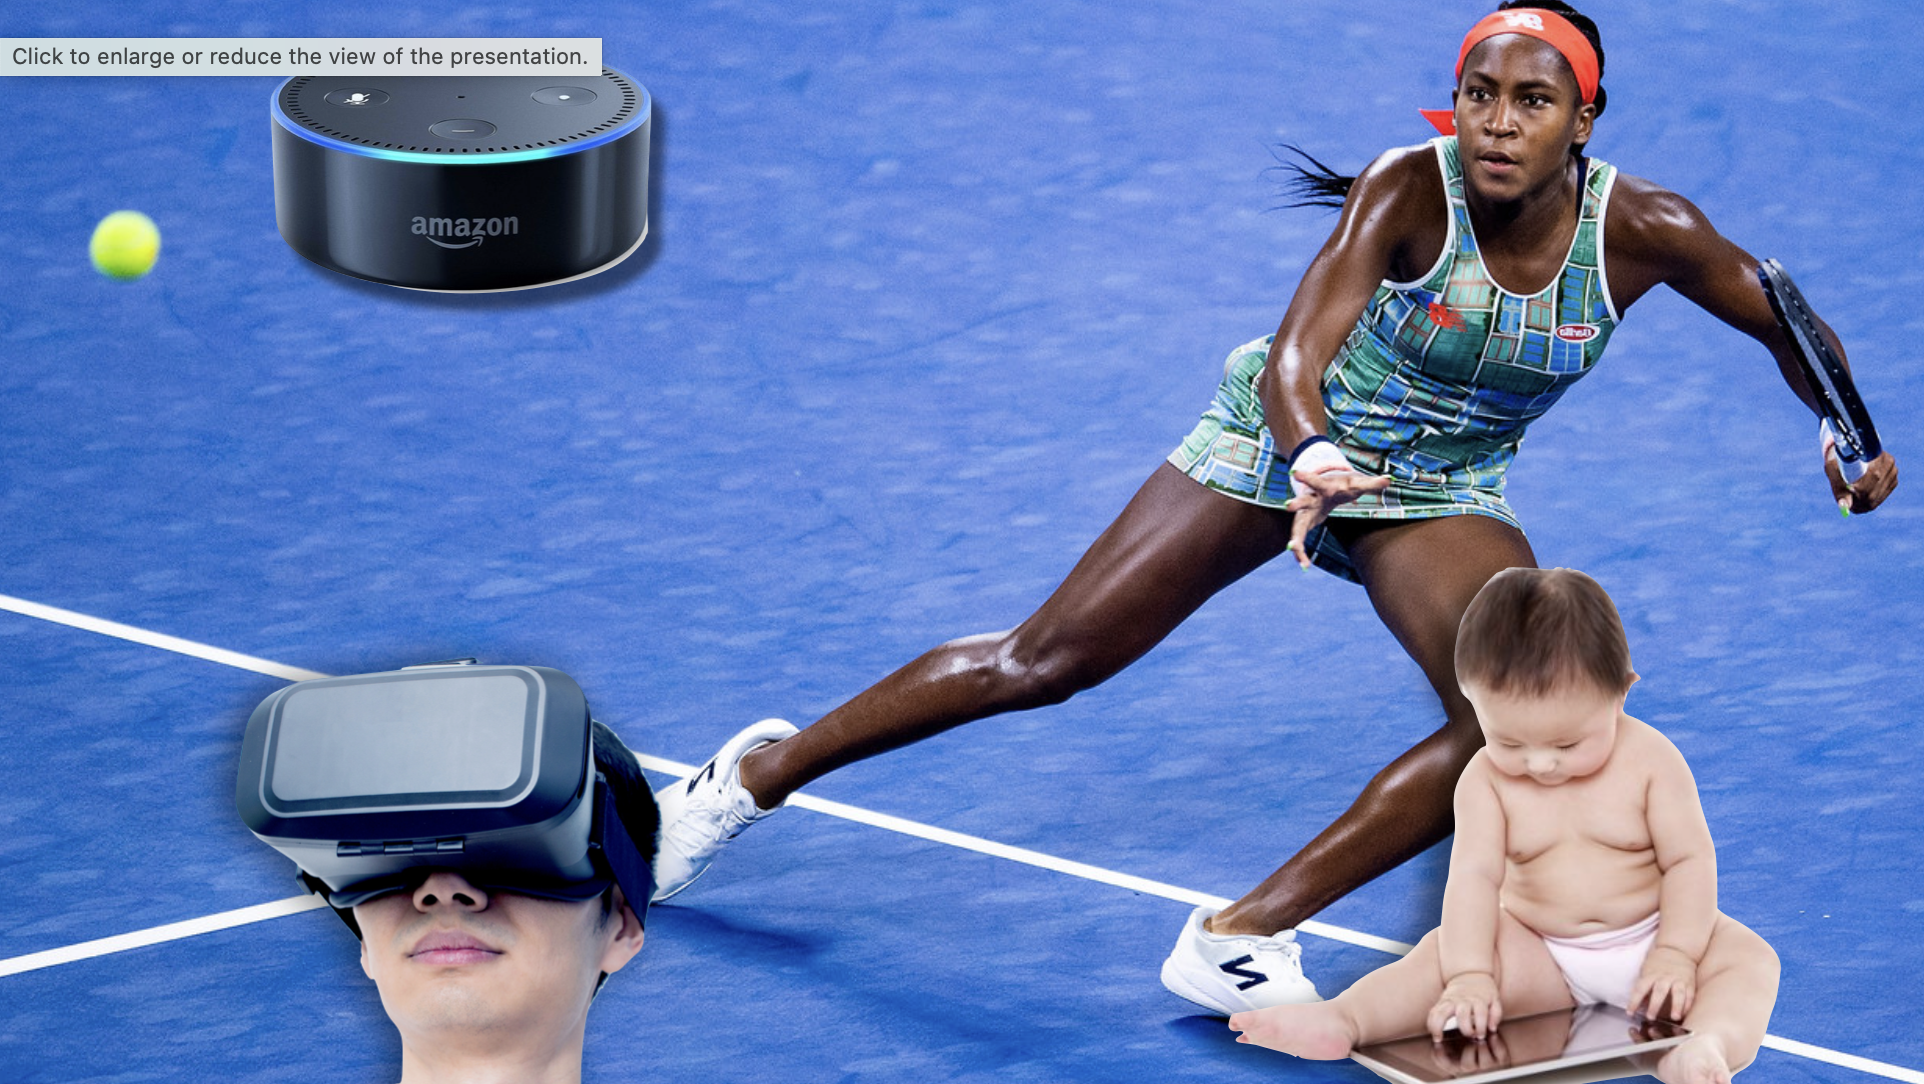 Several pieces of technology juxtaposed with a tennis player
